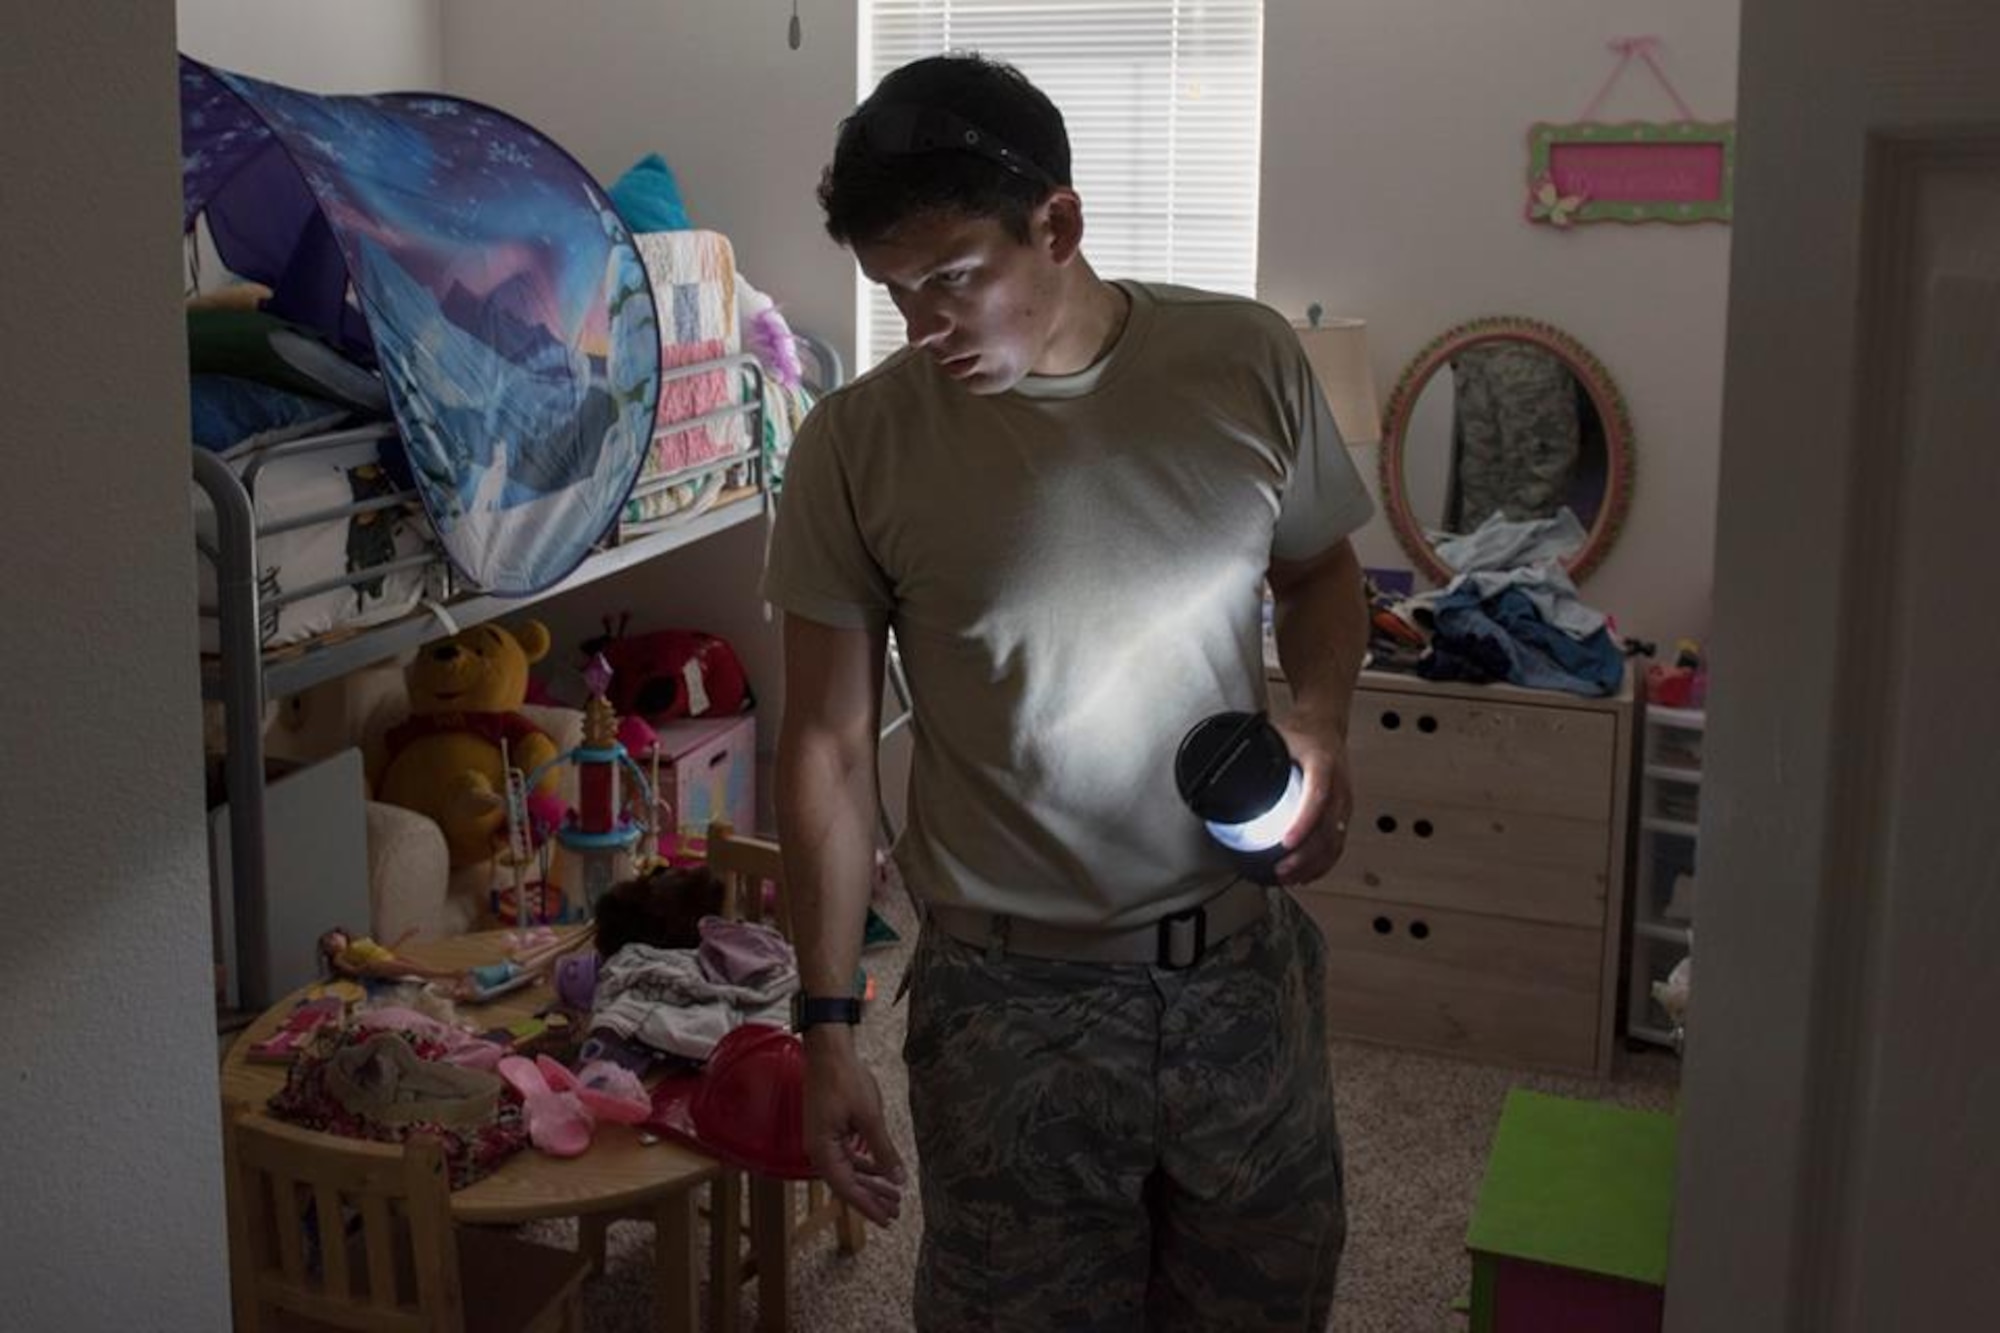 1st Lt. Adam Kriete, 337th Air Control Squadron student, searches for clothing items in his daughters room that was affected Hurricane Michael, at Tyndall Air Force Base, Oct. 19, 2018. Tyndall AFB was damaged by Hurricane Michael which displaced approximately 11,000 people, to include the Kriete family who travelled back to Tyndall during a five hour window to recover their belongings.